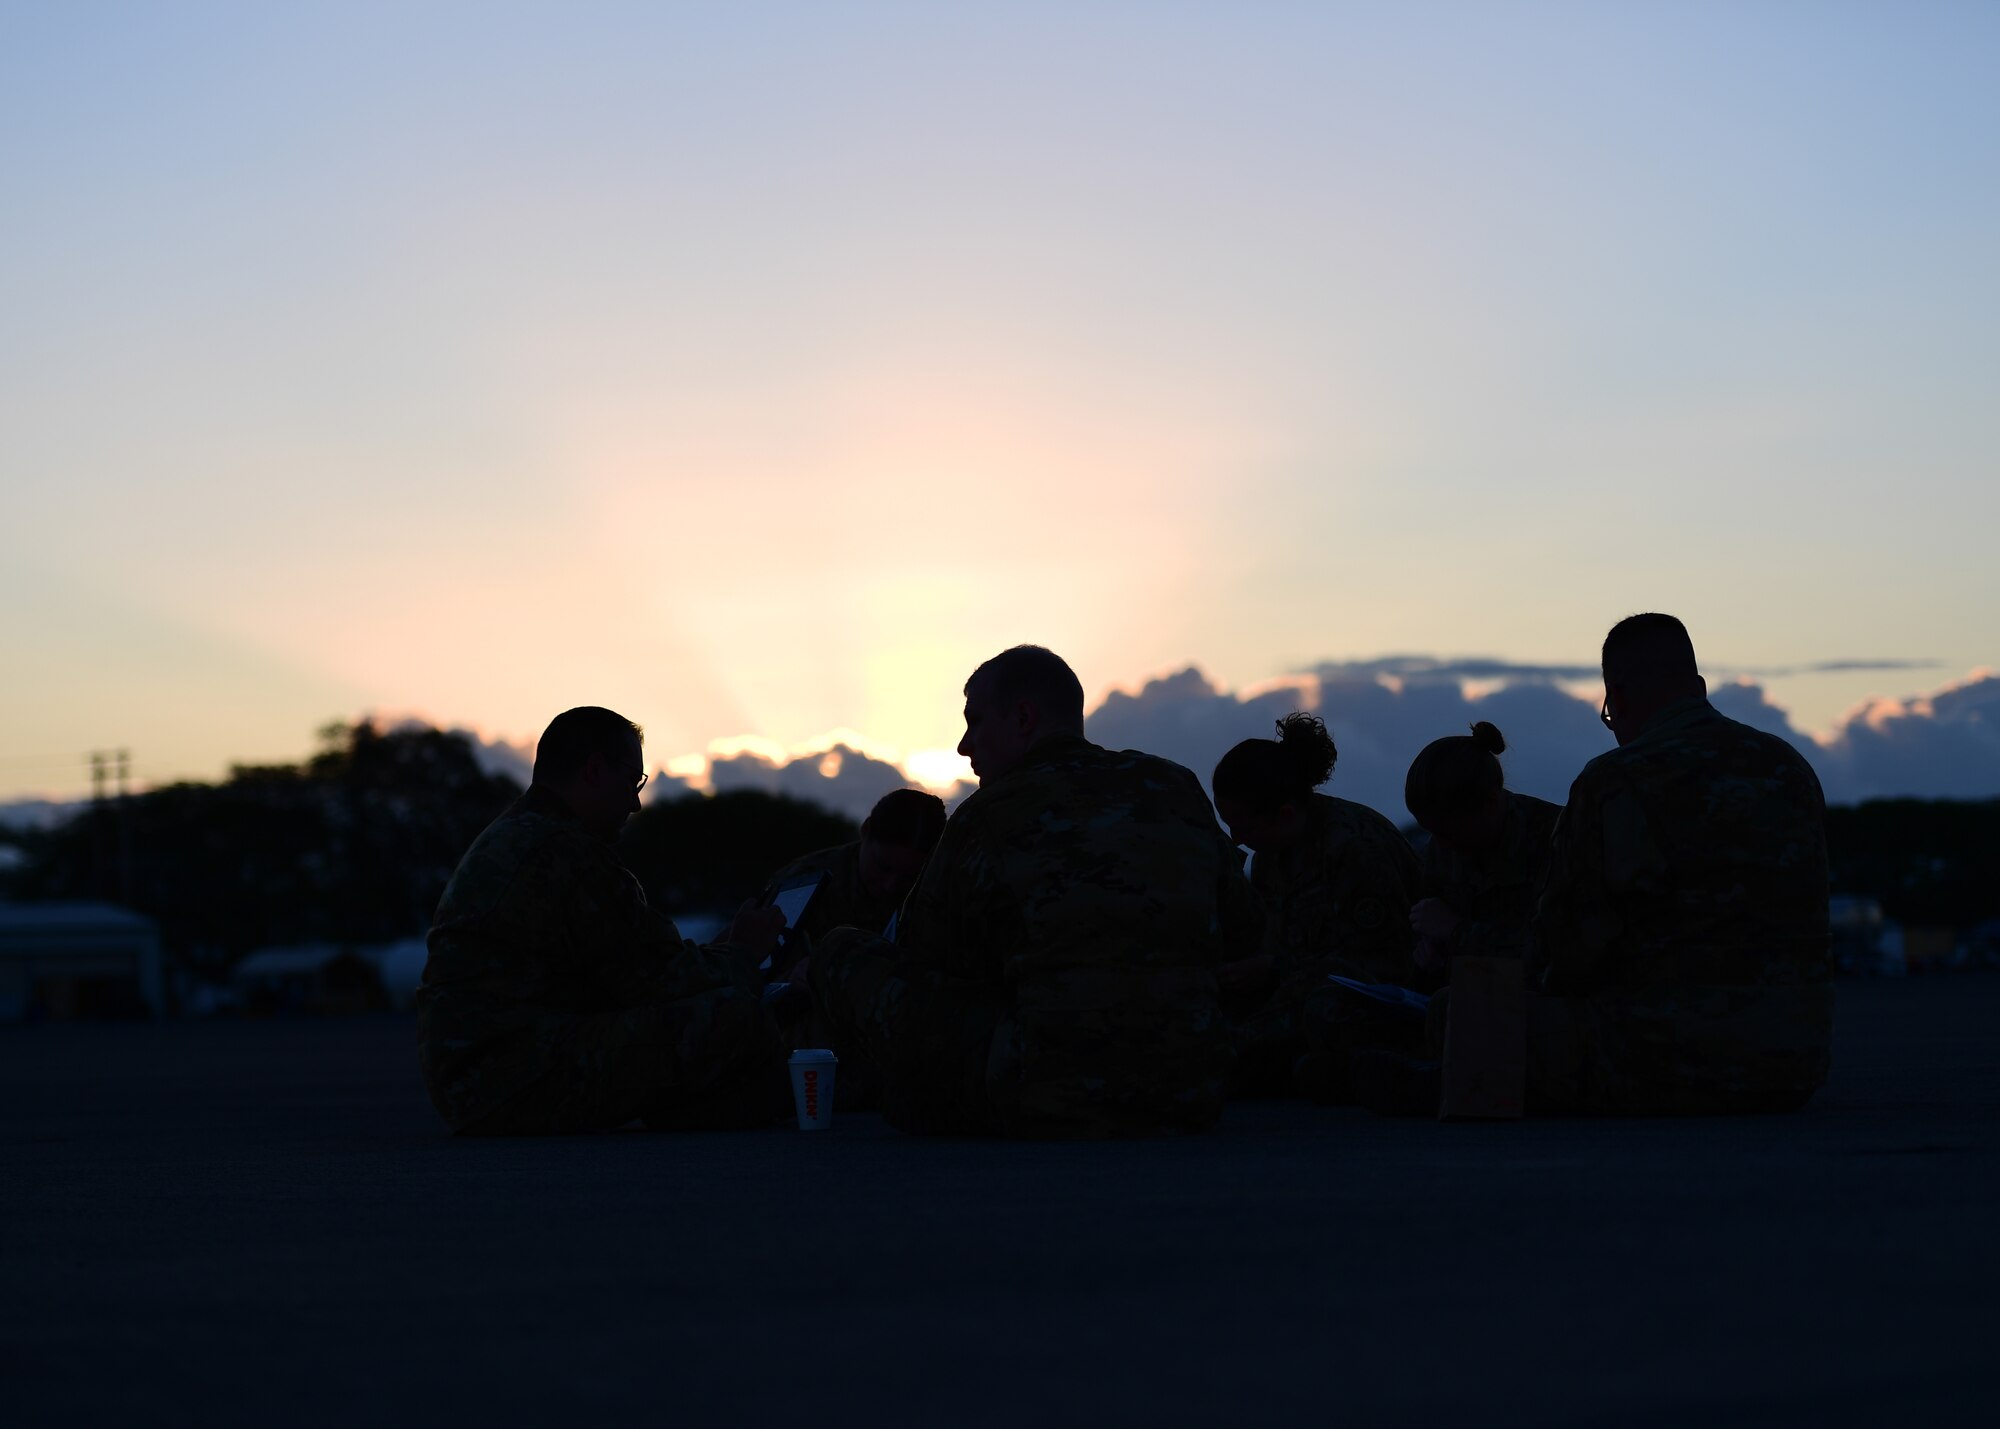 Airmen from the 911th Aeromedical Evacuation Squadron sit and study at Barbers Point Airfield, Hawaii April 26, 2019. The 911th AES trained throughout the week and went over ground procedures as well as in air medical procedures. (U.S. Air Force Photo by Senior Airman Grace Thomson)